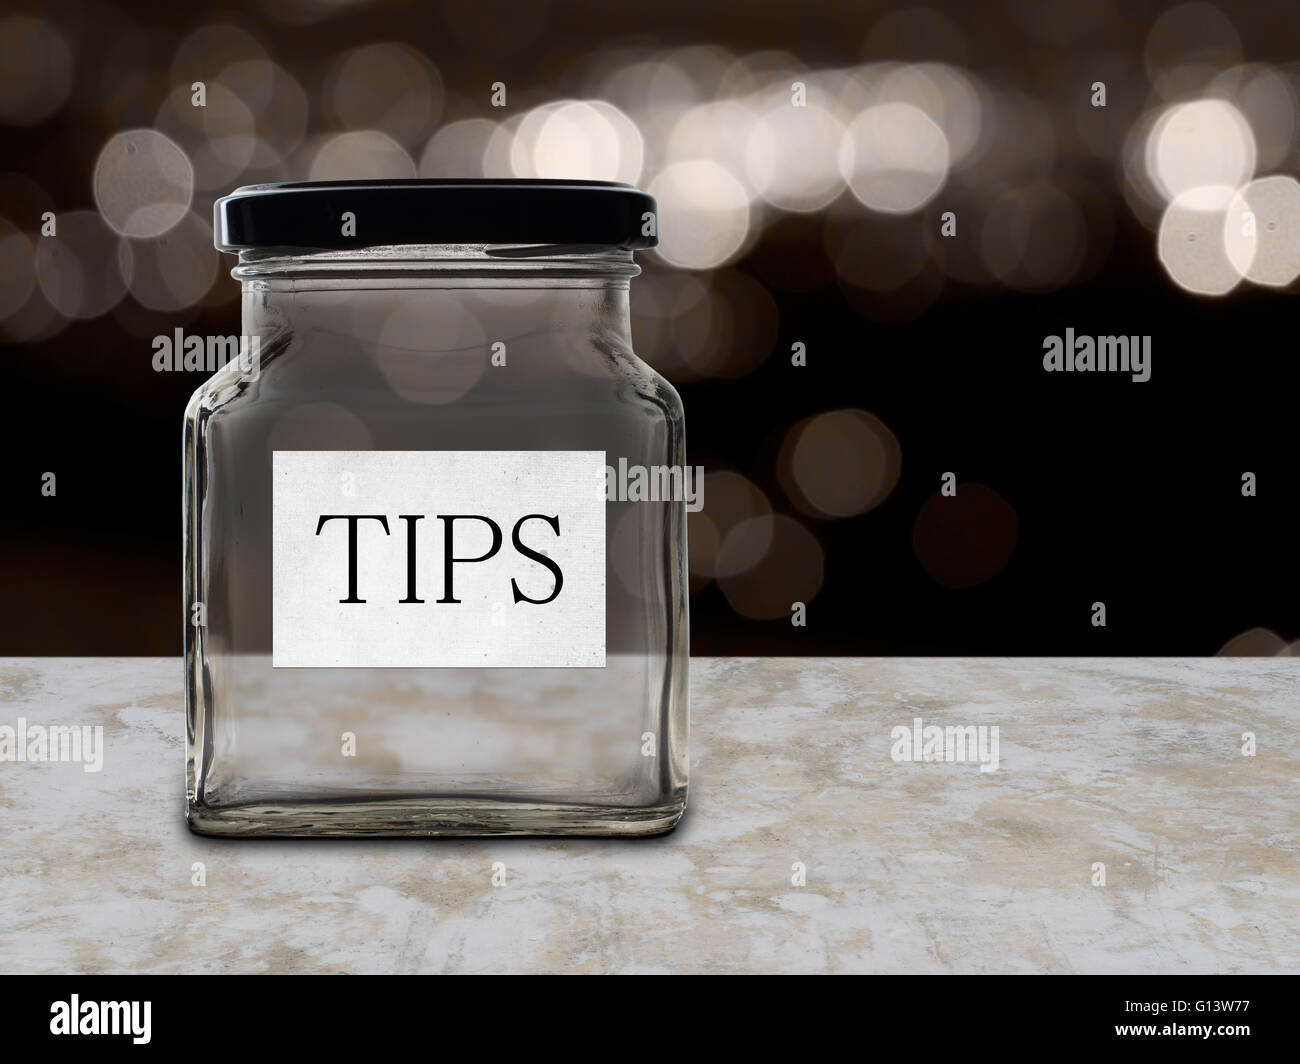 Low wage issue. Empty tips jar, bokeh background suggests bar/restaurant. Stock Photo